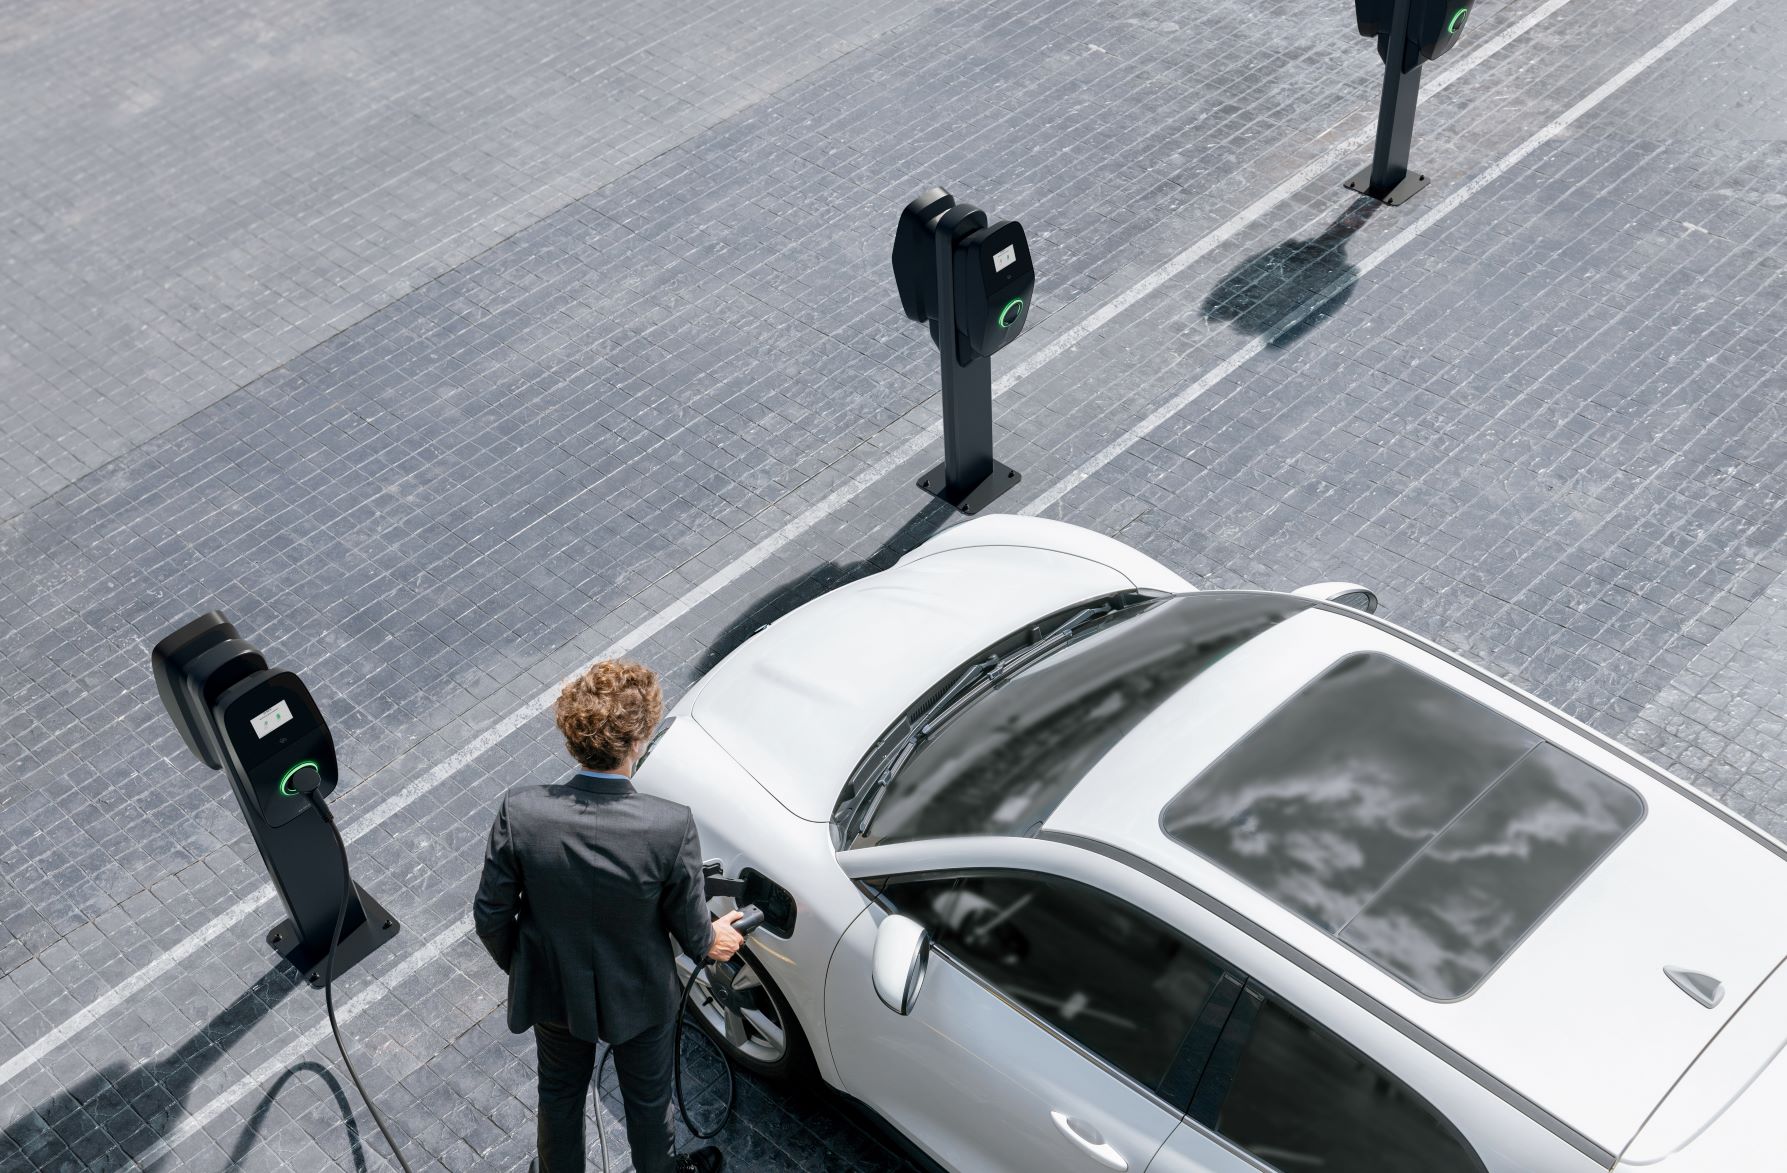 The EVBox Liviqo allows businesses to start small and expand their EV charging offering as demand grows